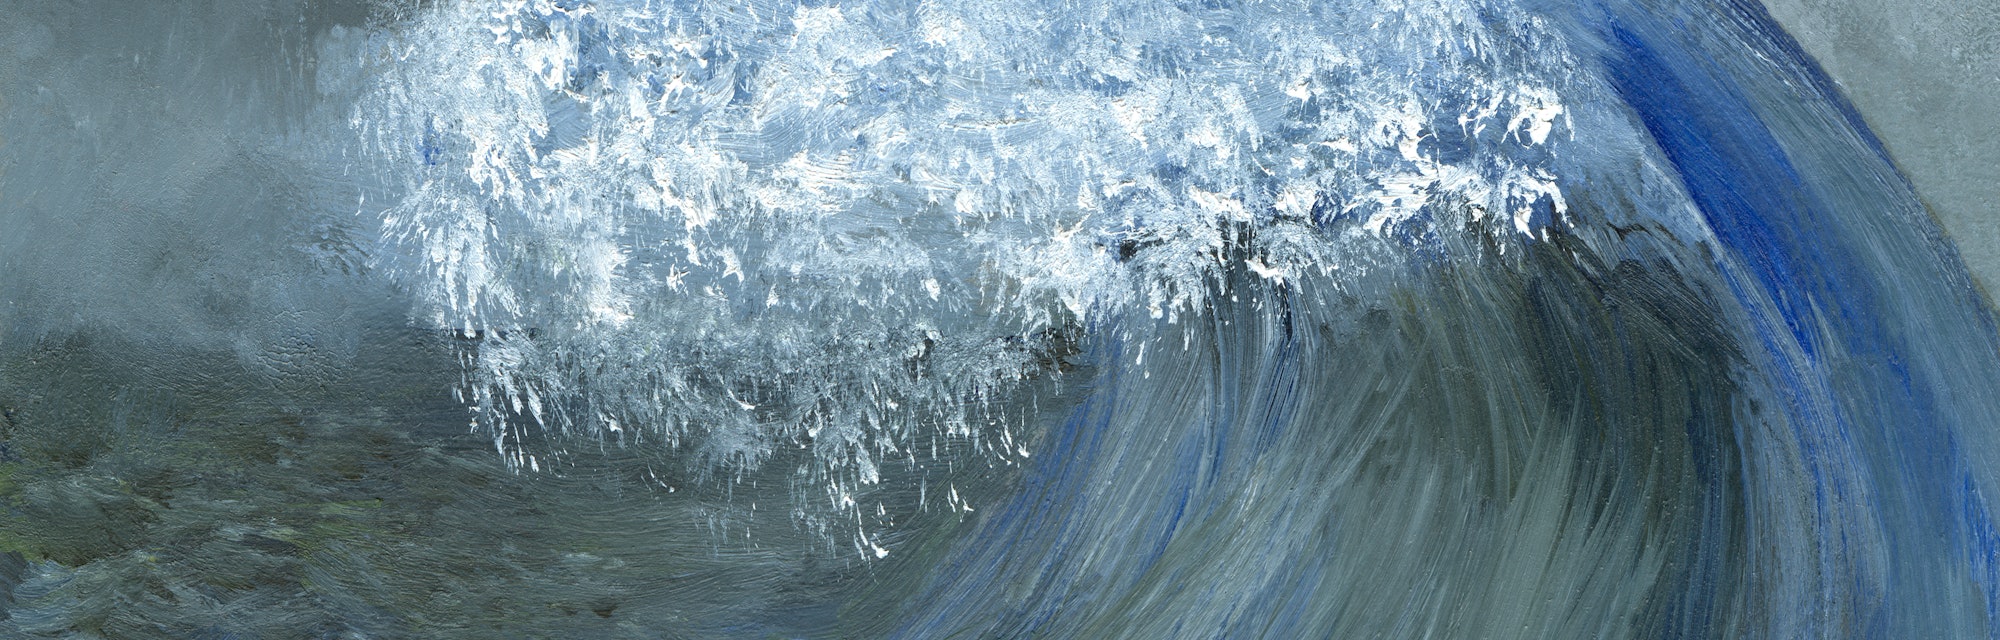 Ocean wave, my own artwork, scanned. I am the author of this painting and the owner of the copyright...